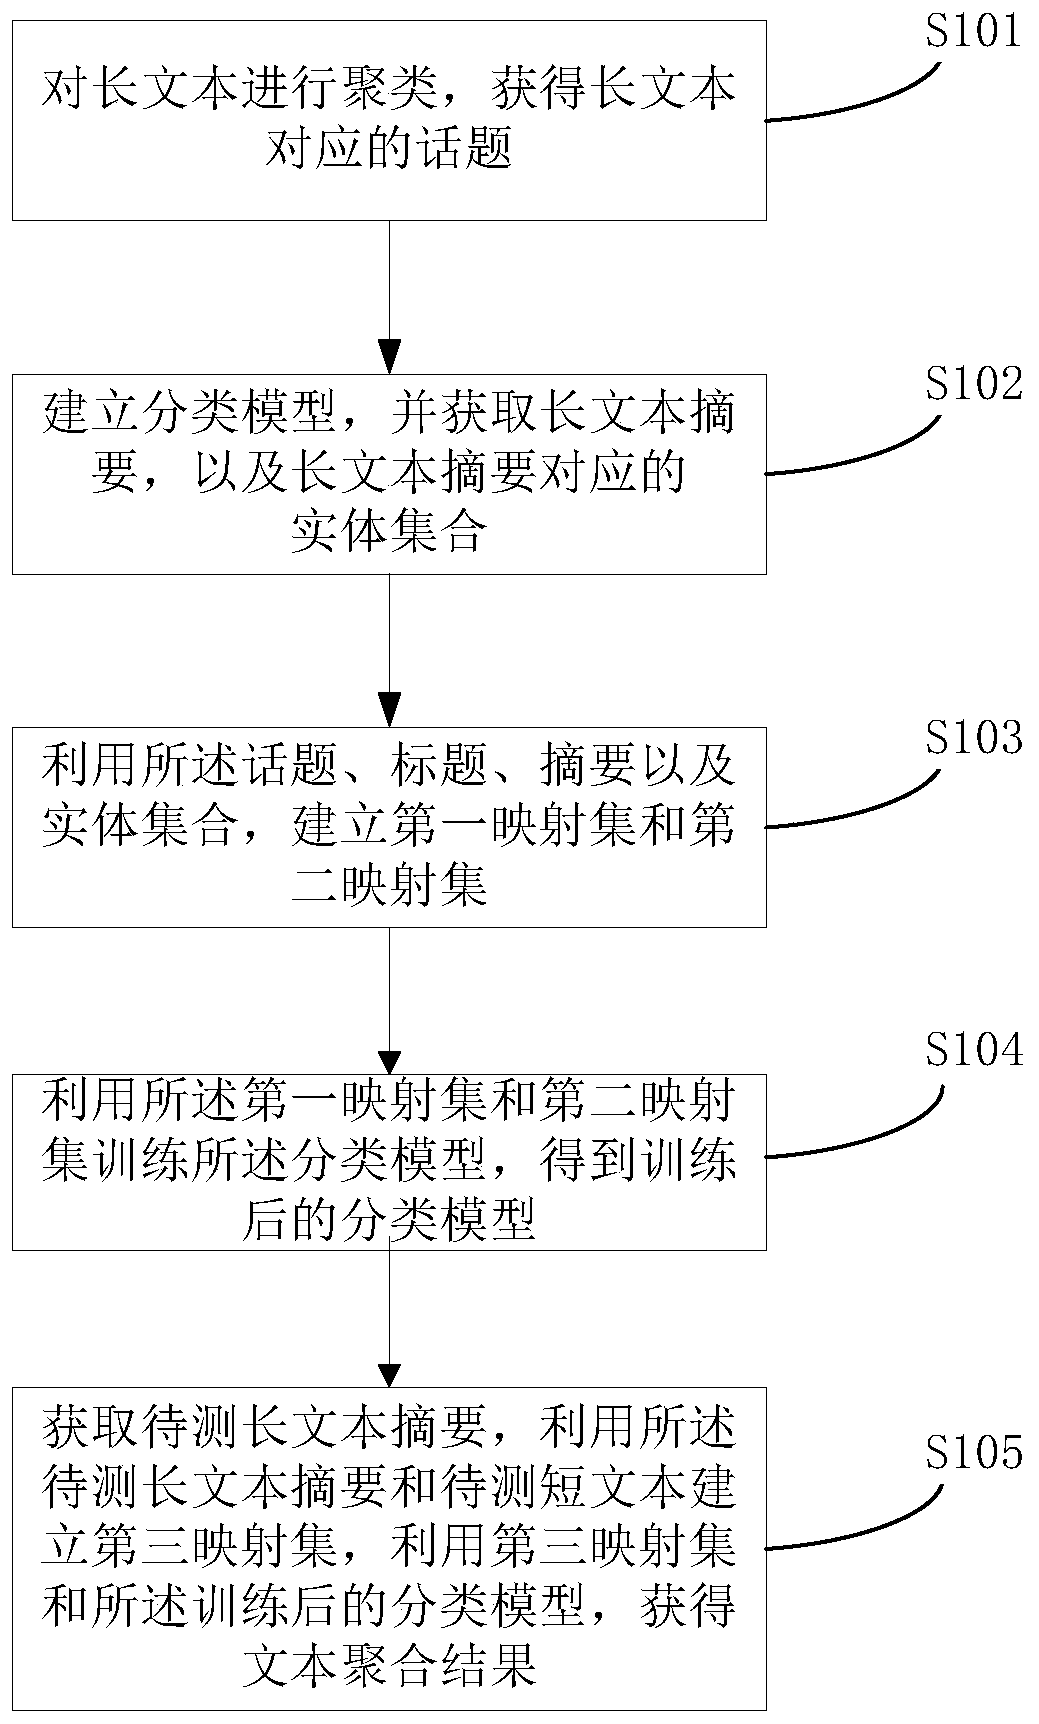 A text aggregation method and system